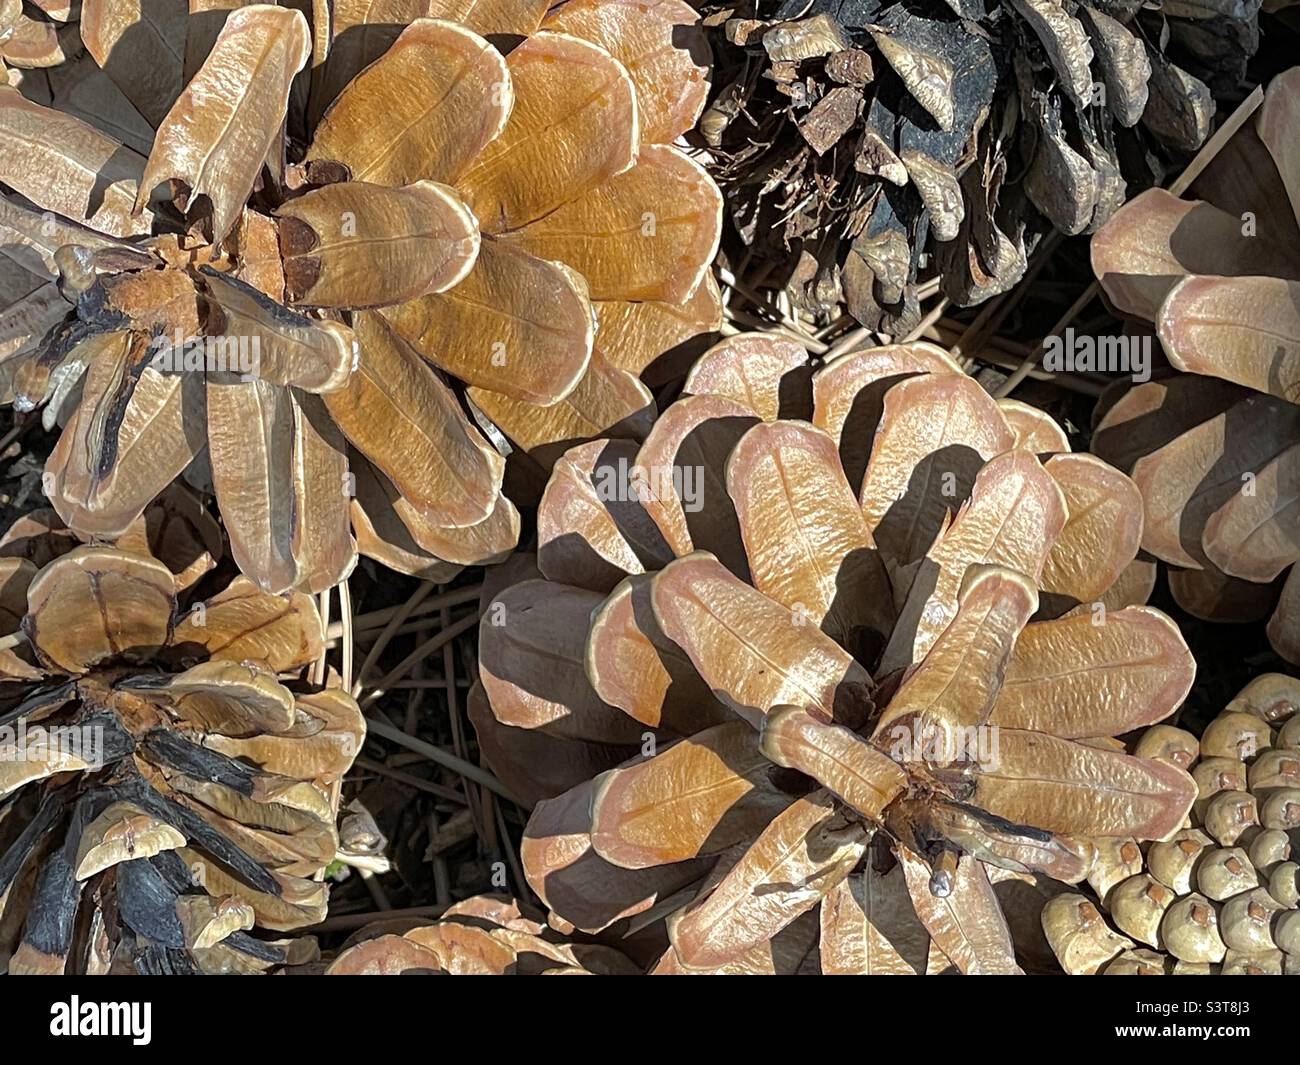 A grouping of fallen pine cones taken close up makes for a pleasing natural abstract image. Stock Photo